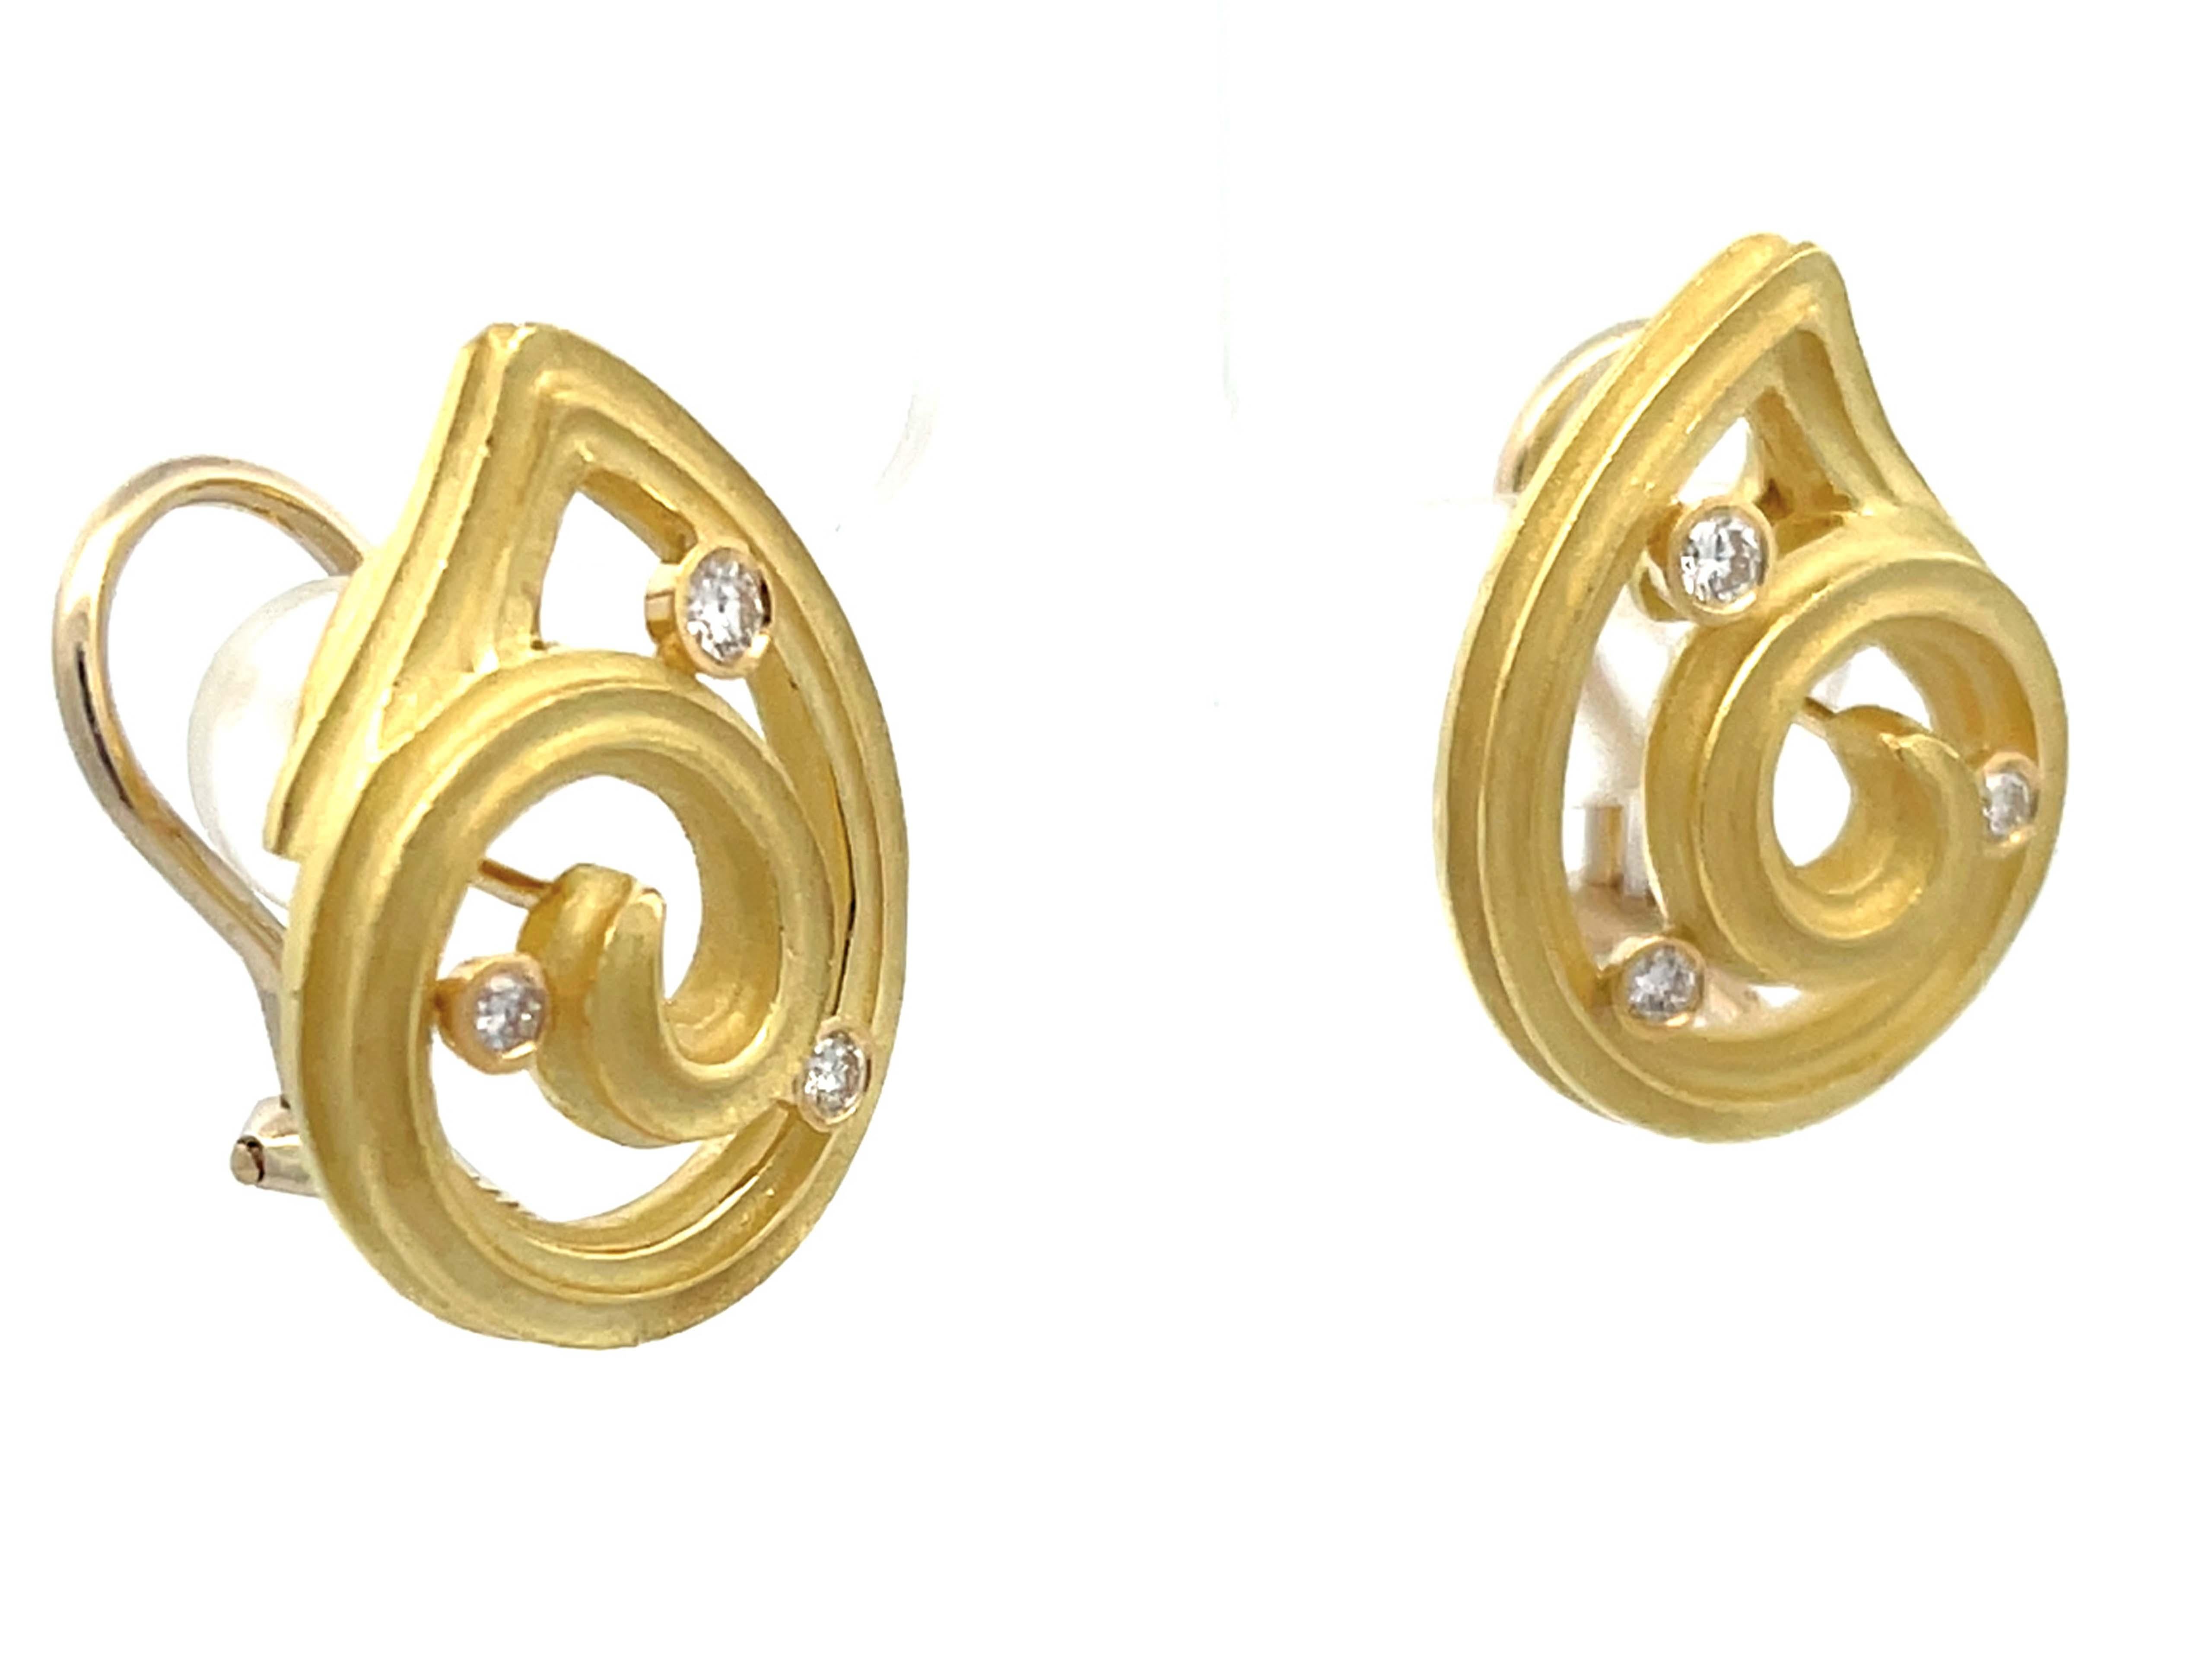 Brilliant Cut Diamond Swirl Frosted Finish Earrings in 14k Yellow Gold For Sale